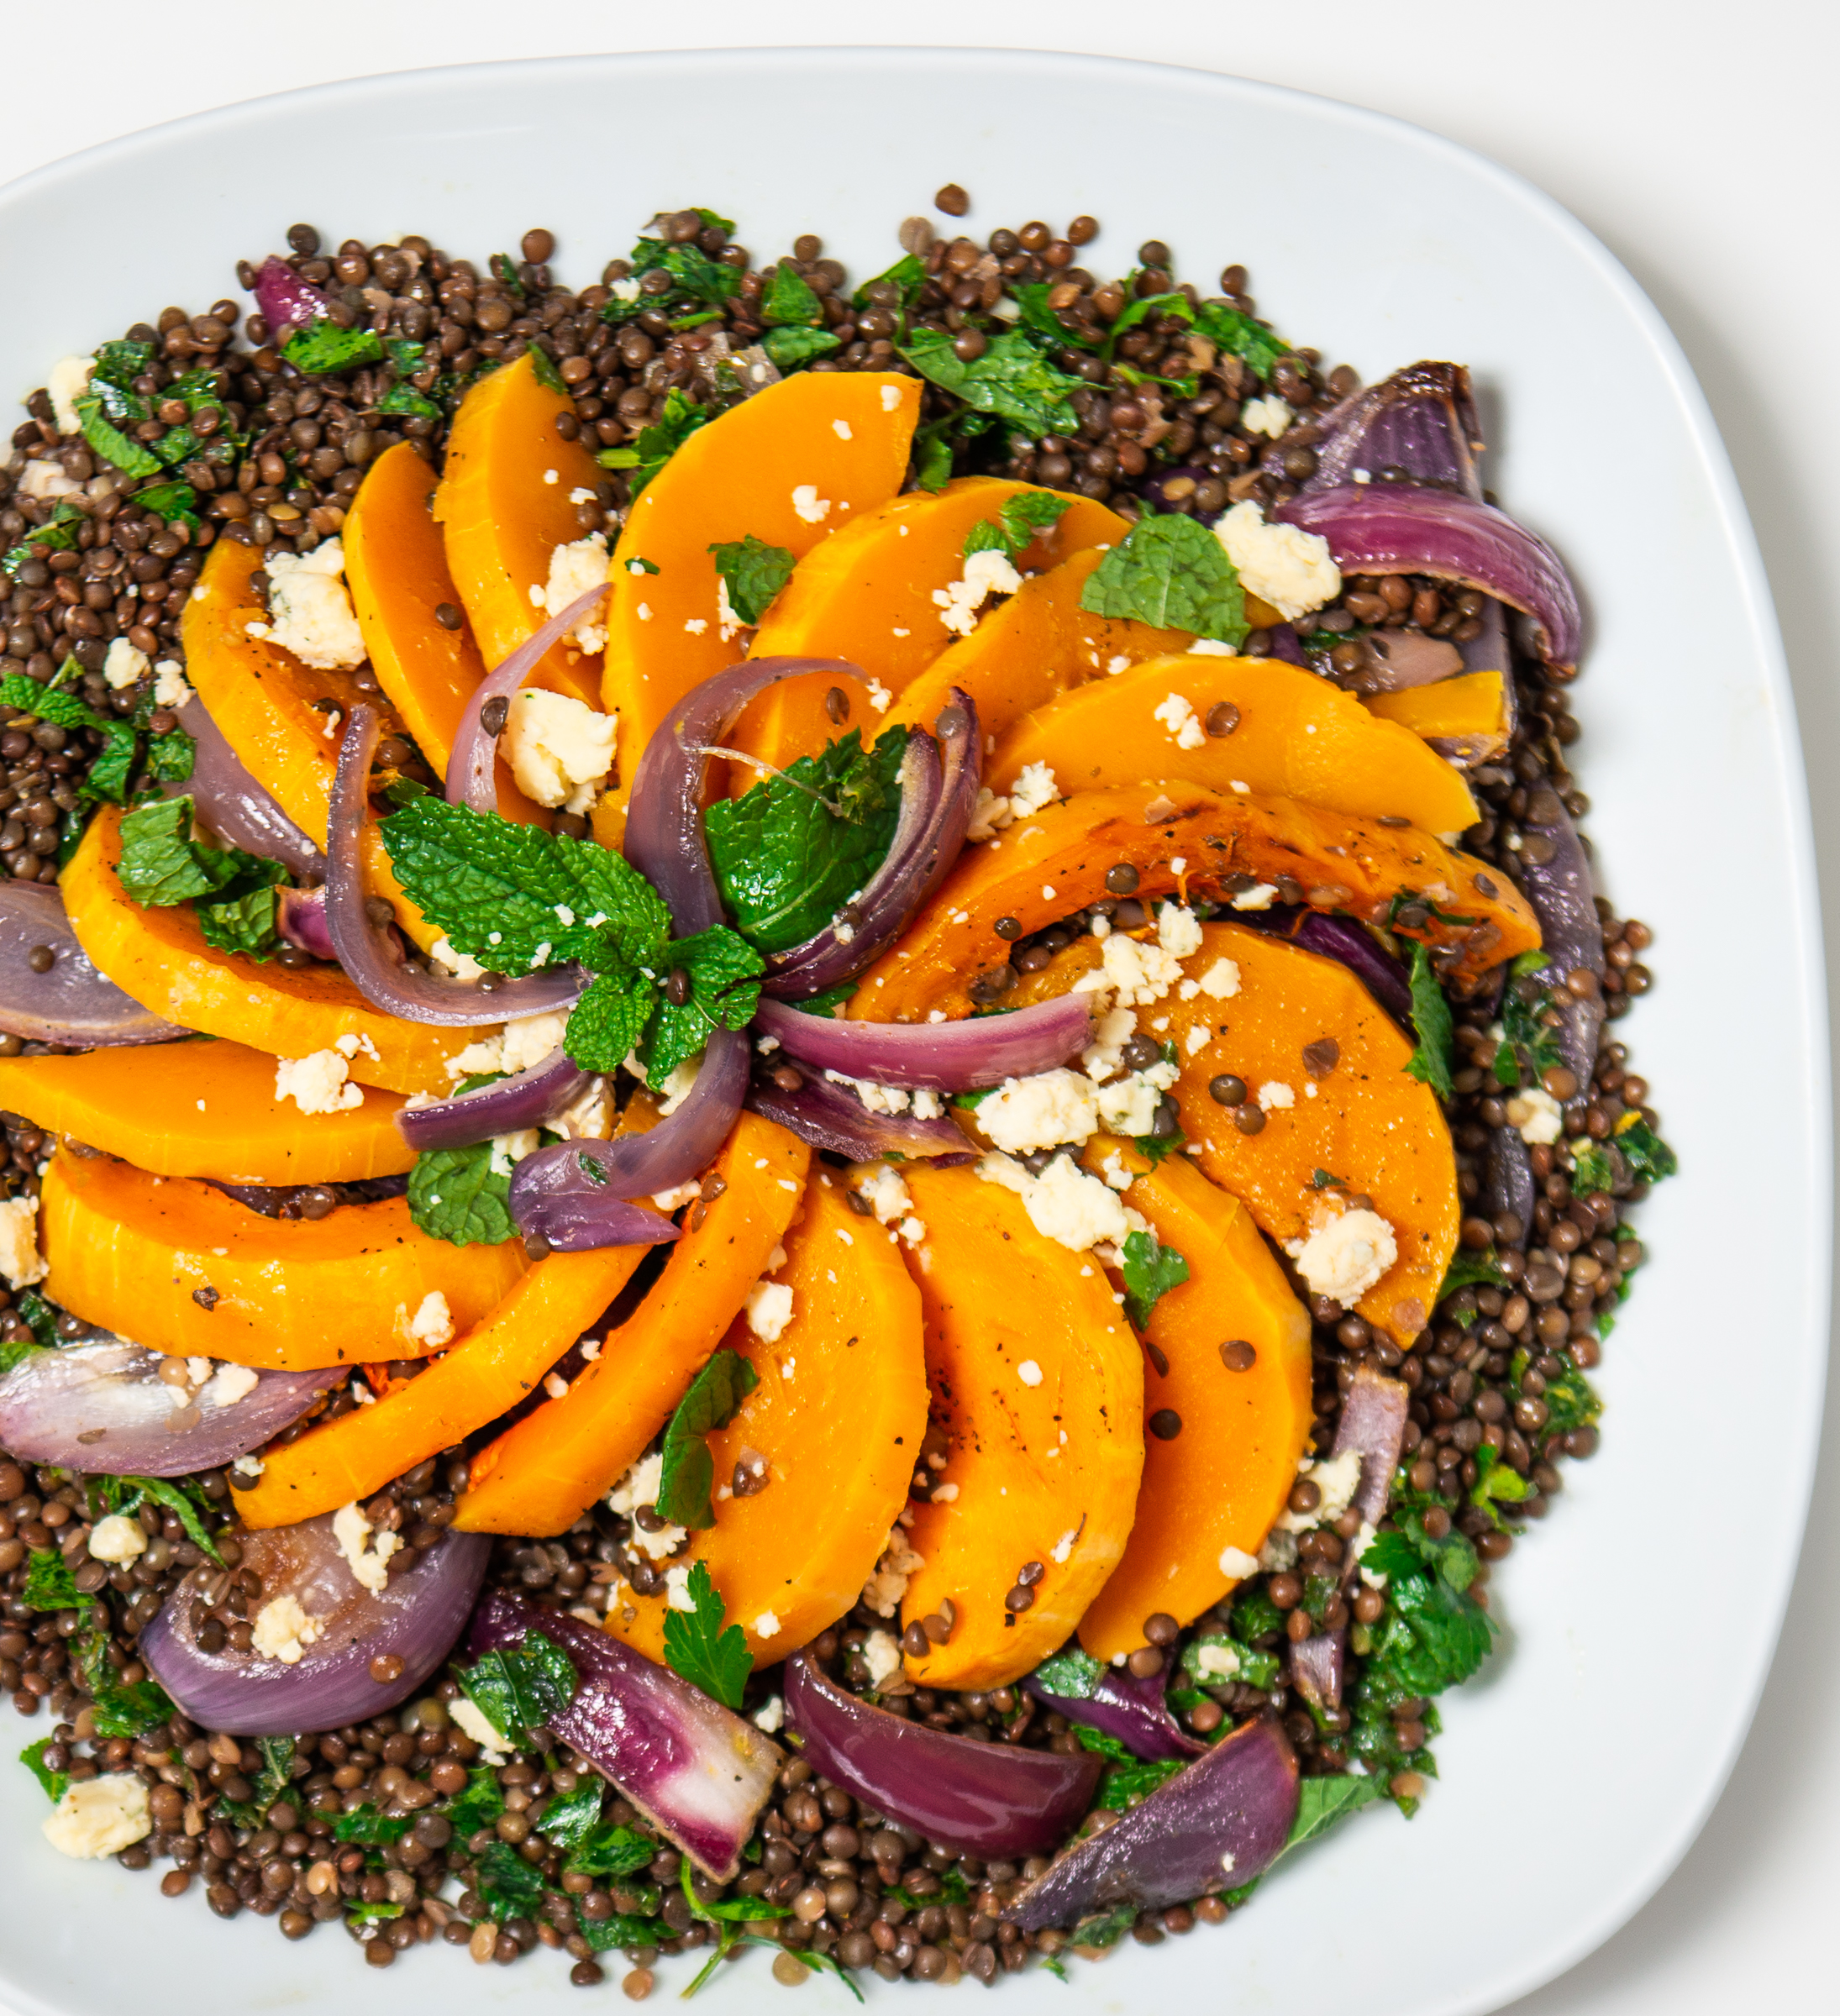 Smooth As Butter: Roasted Butternut Squash With Lentils and Stilton